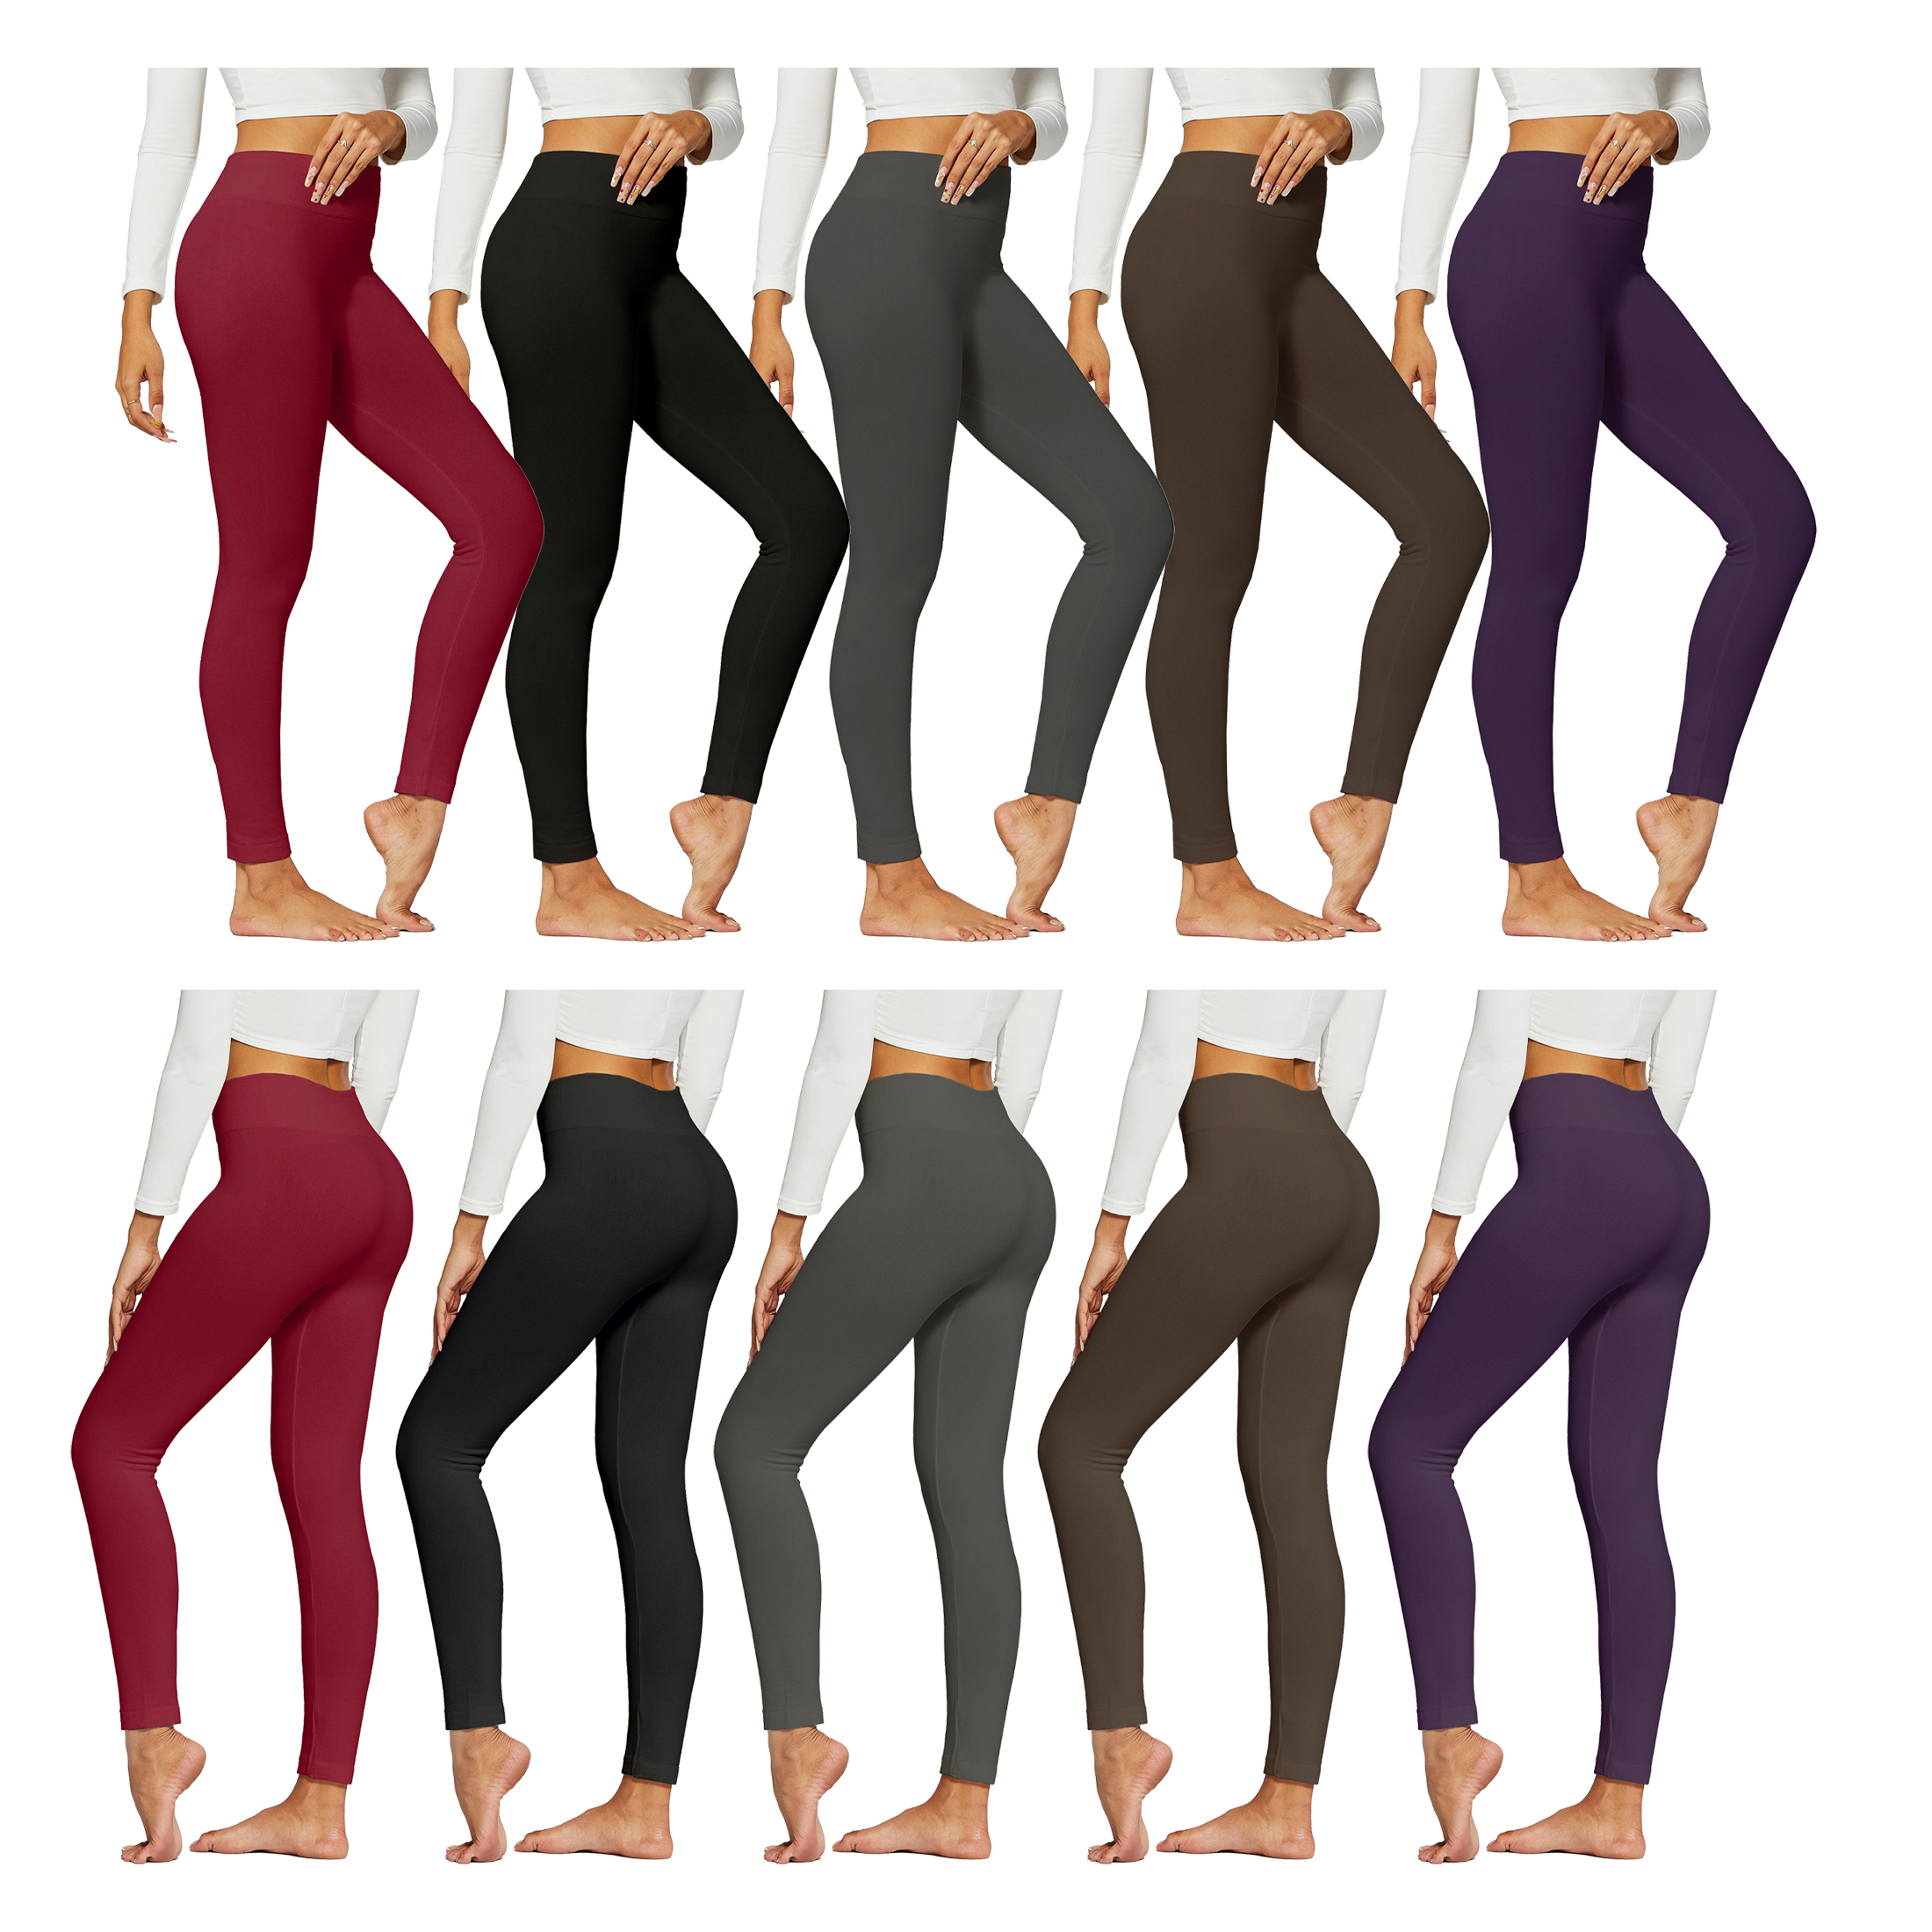 3-Pack:Women's Premium Quality High-Waist Fleece-Lined Leggings (Plus Size Available) - Black, Grey & Red, Large/X-Large